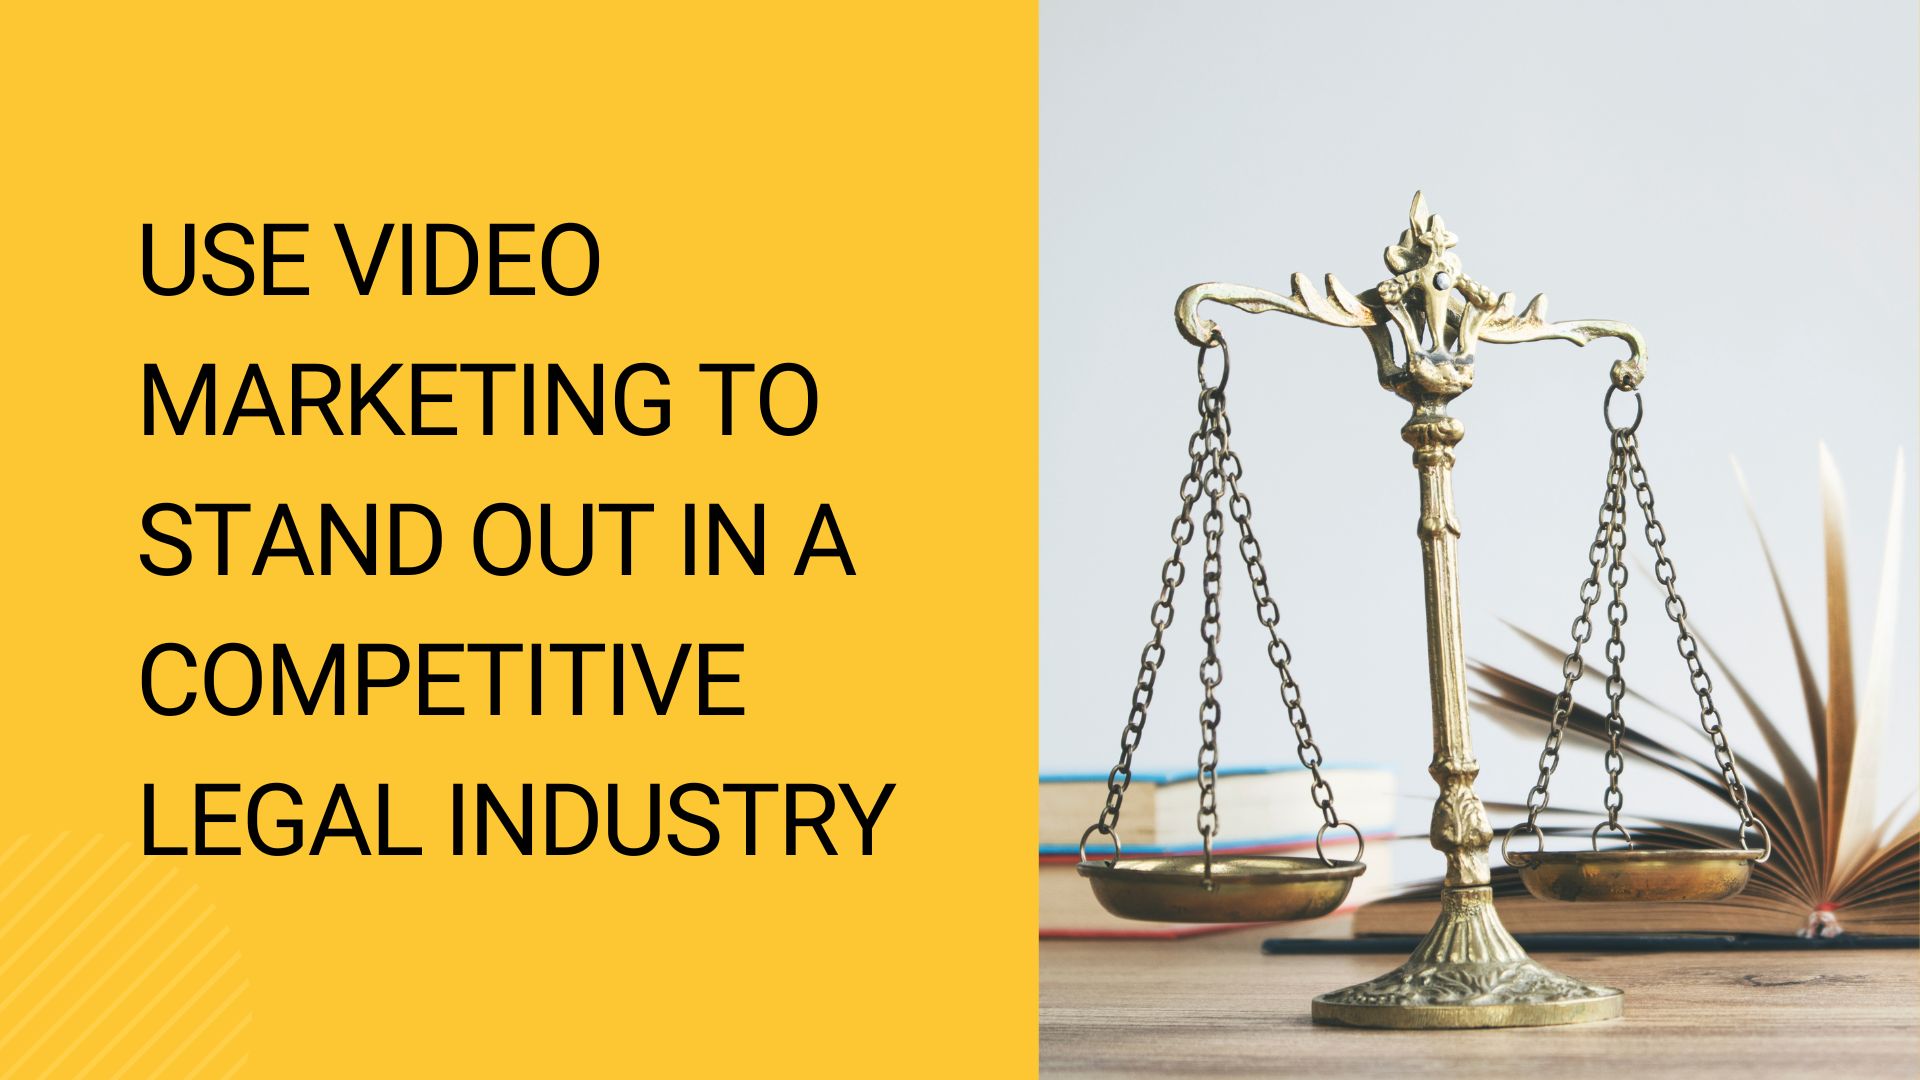 Use Video Marketing to Stand Out in a Competitive Legal Industry